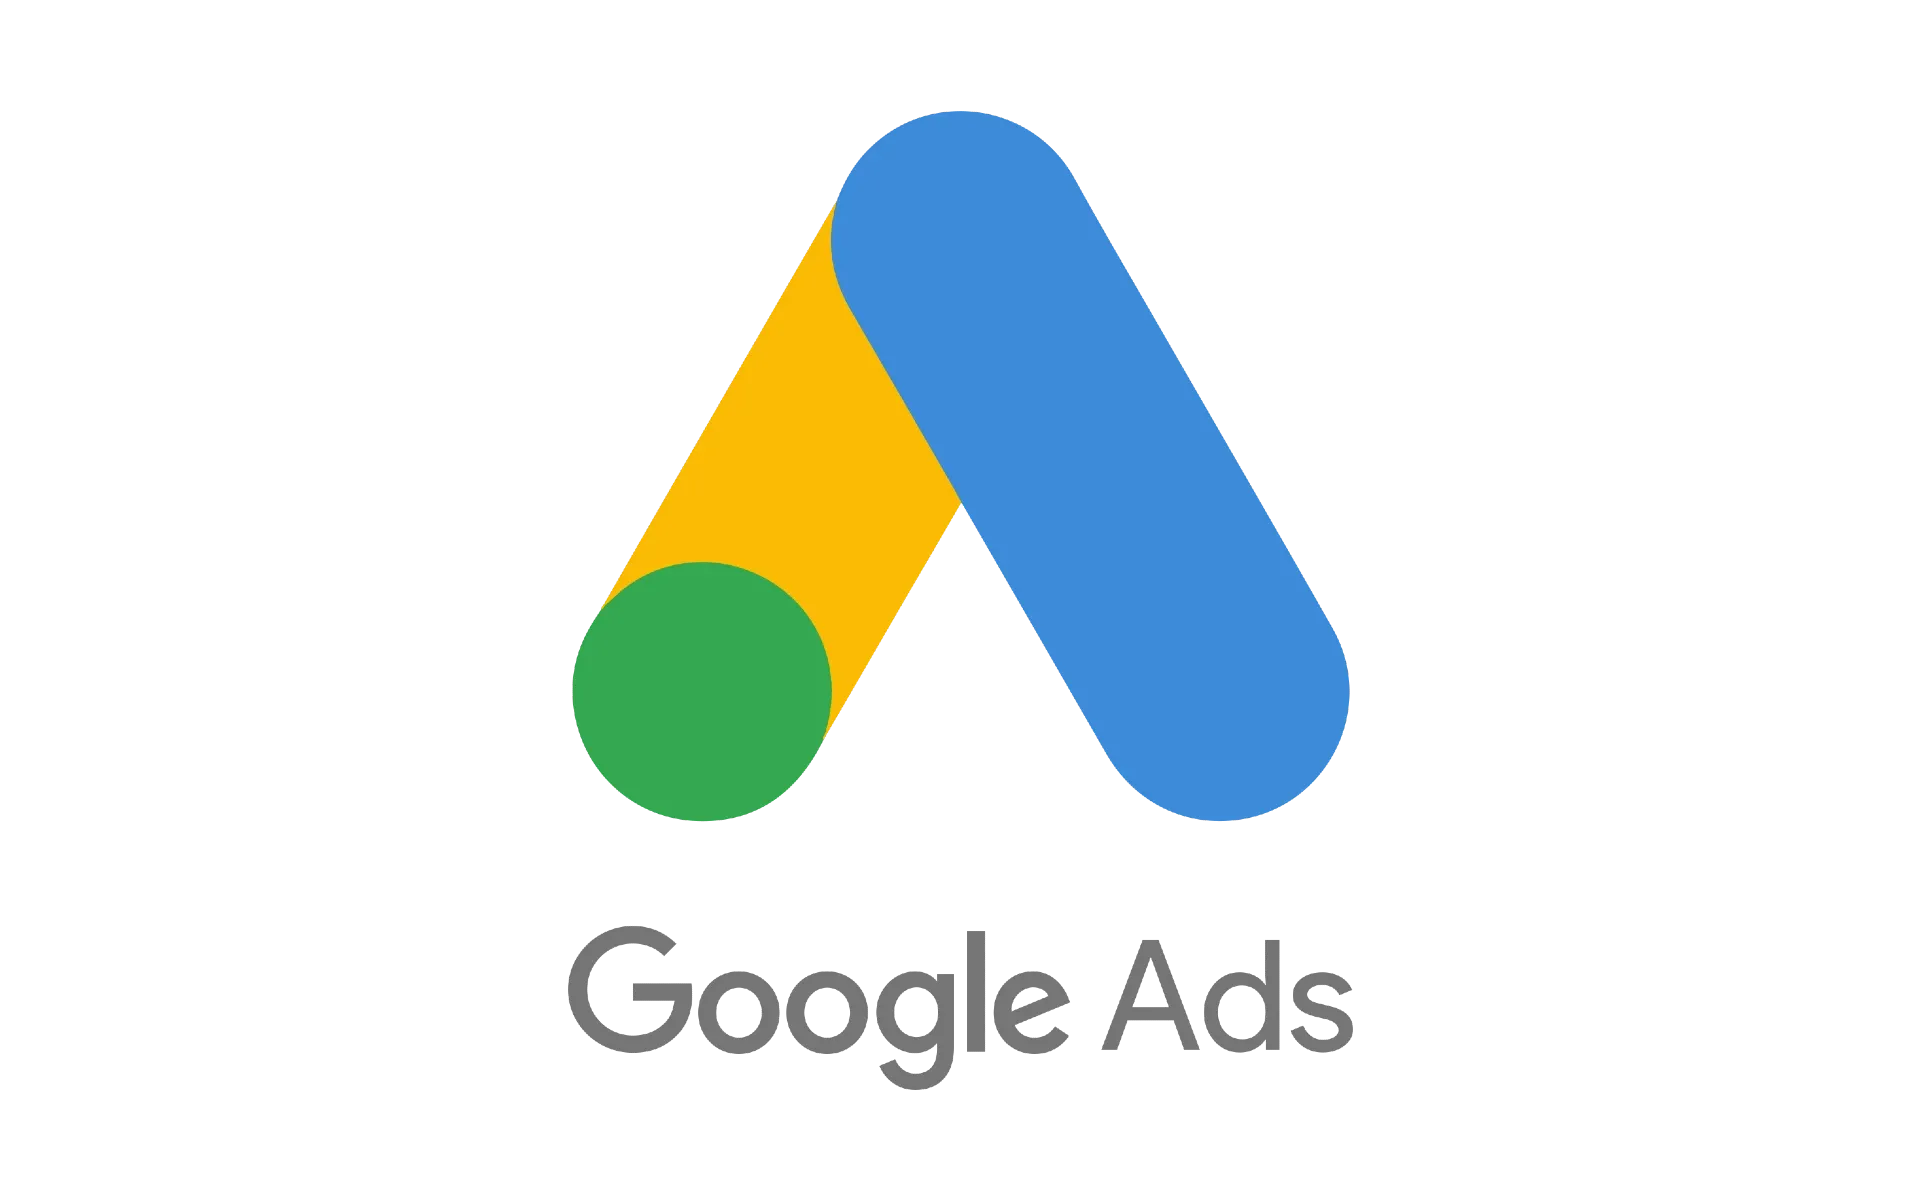 Google Ads API Update: New Features and Changes for v17